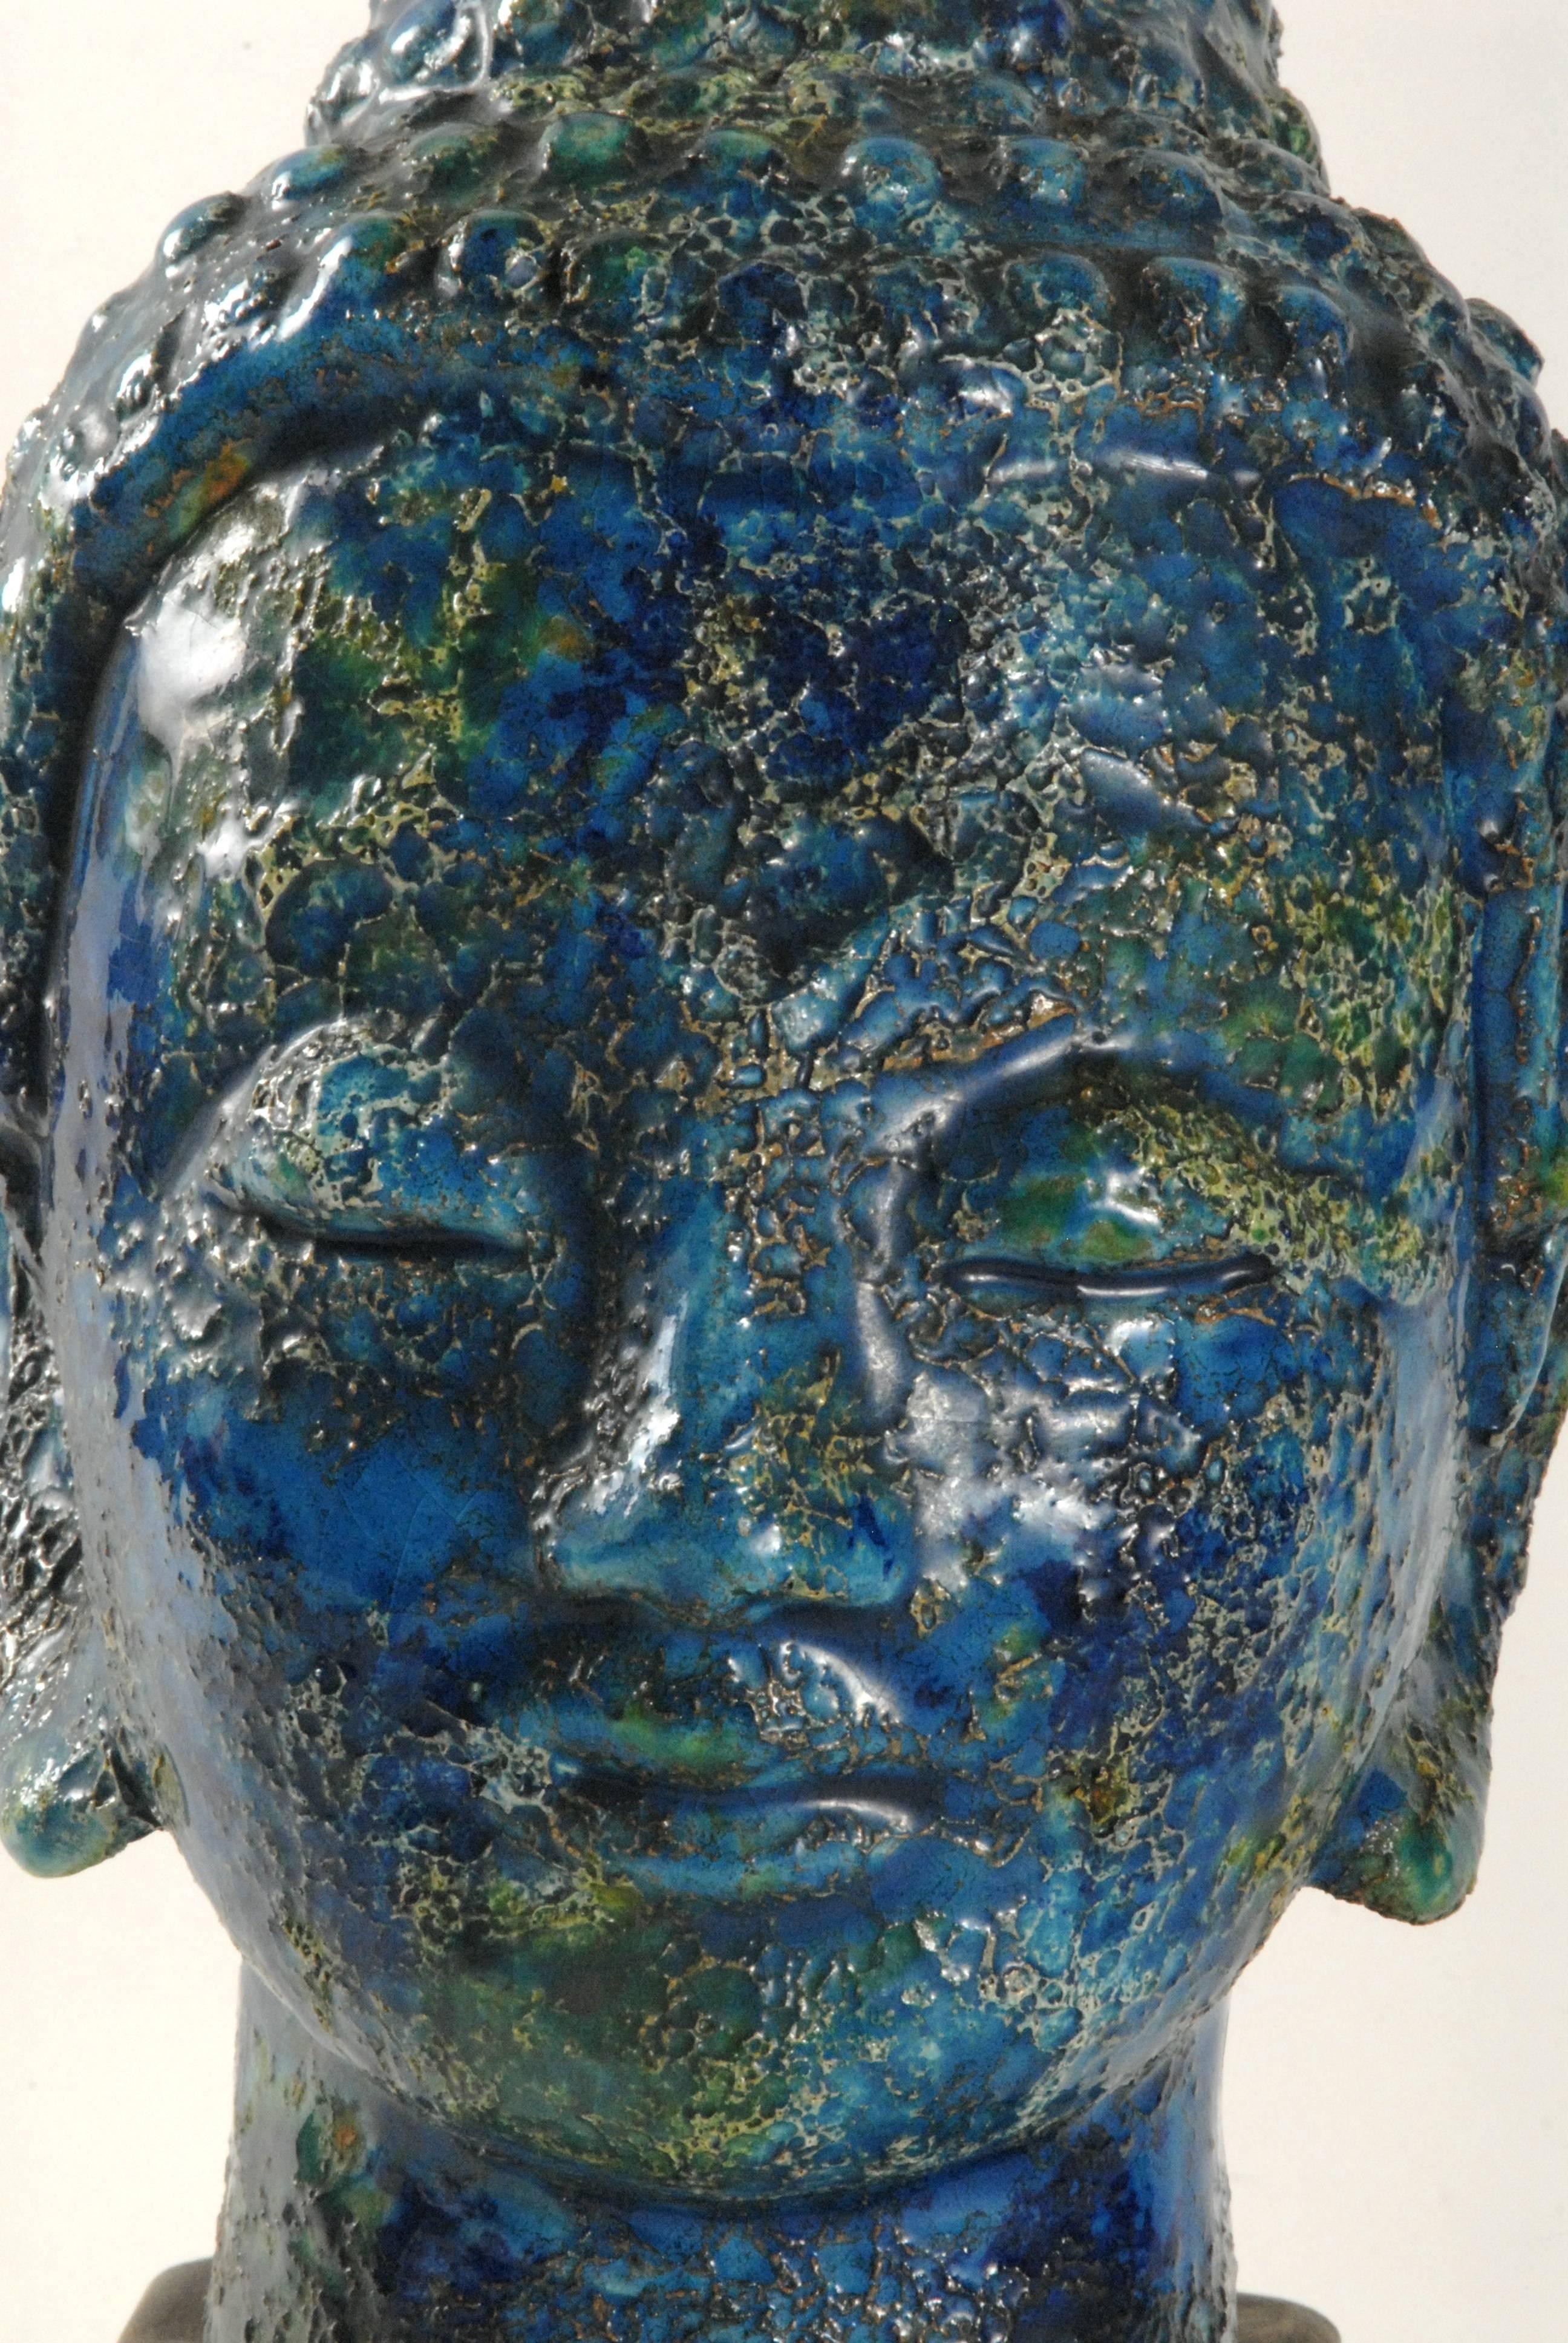 A wonderful Aldo Londi for Bitossi Buddha's head with a blue 'Cinese' glaze replicating ancient bronzes that were recovered from the depths of the world's oceans. Stunning vibrant glaze in near pristine condition.